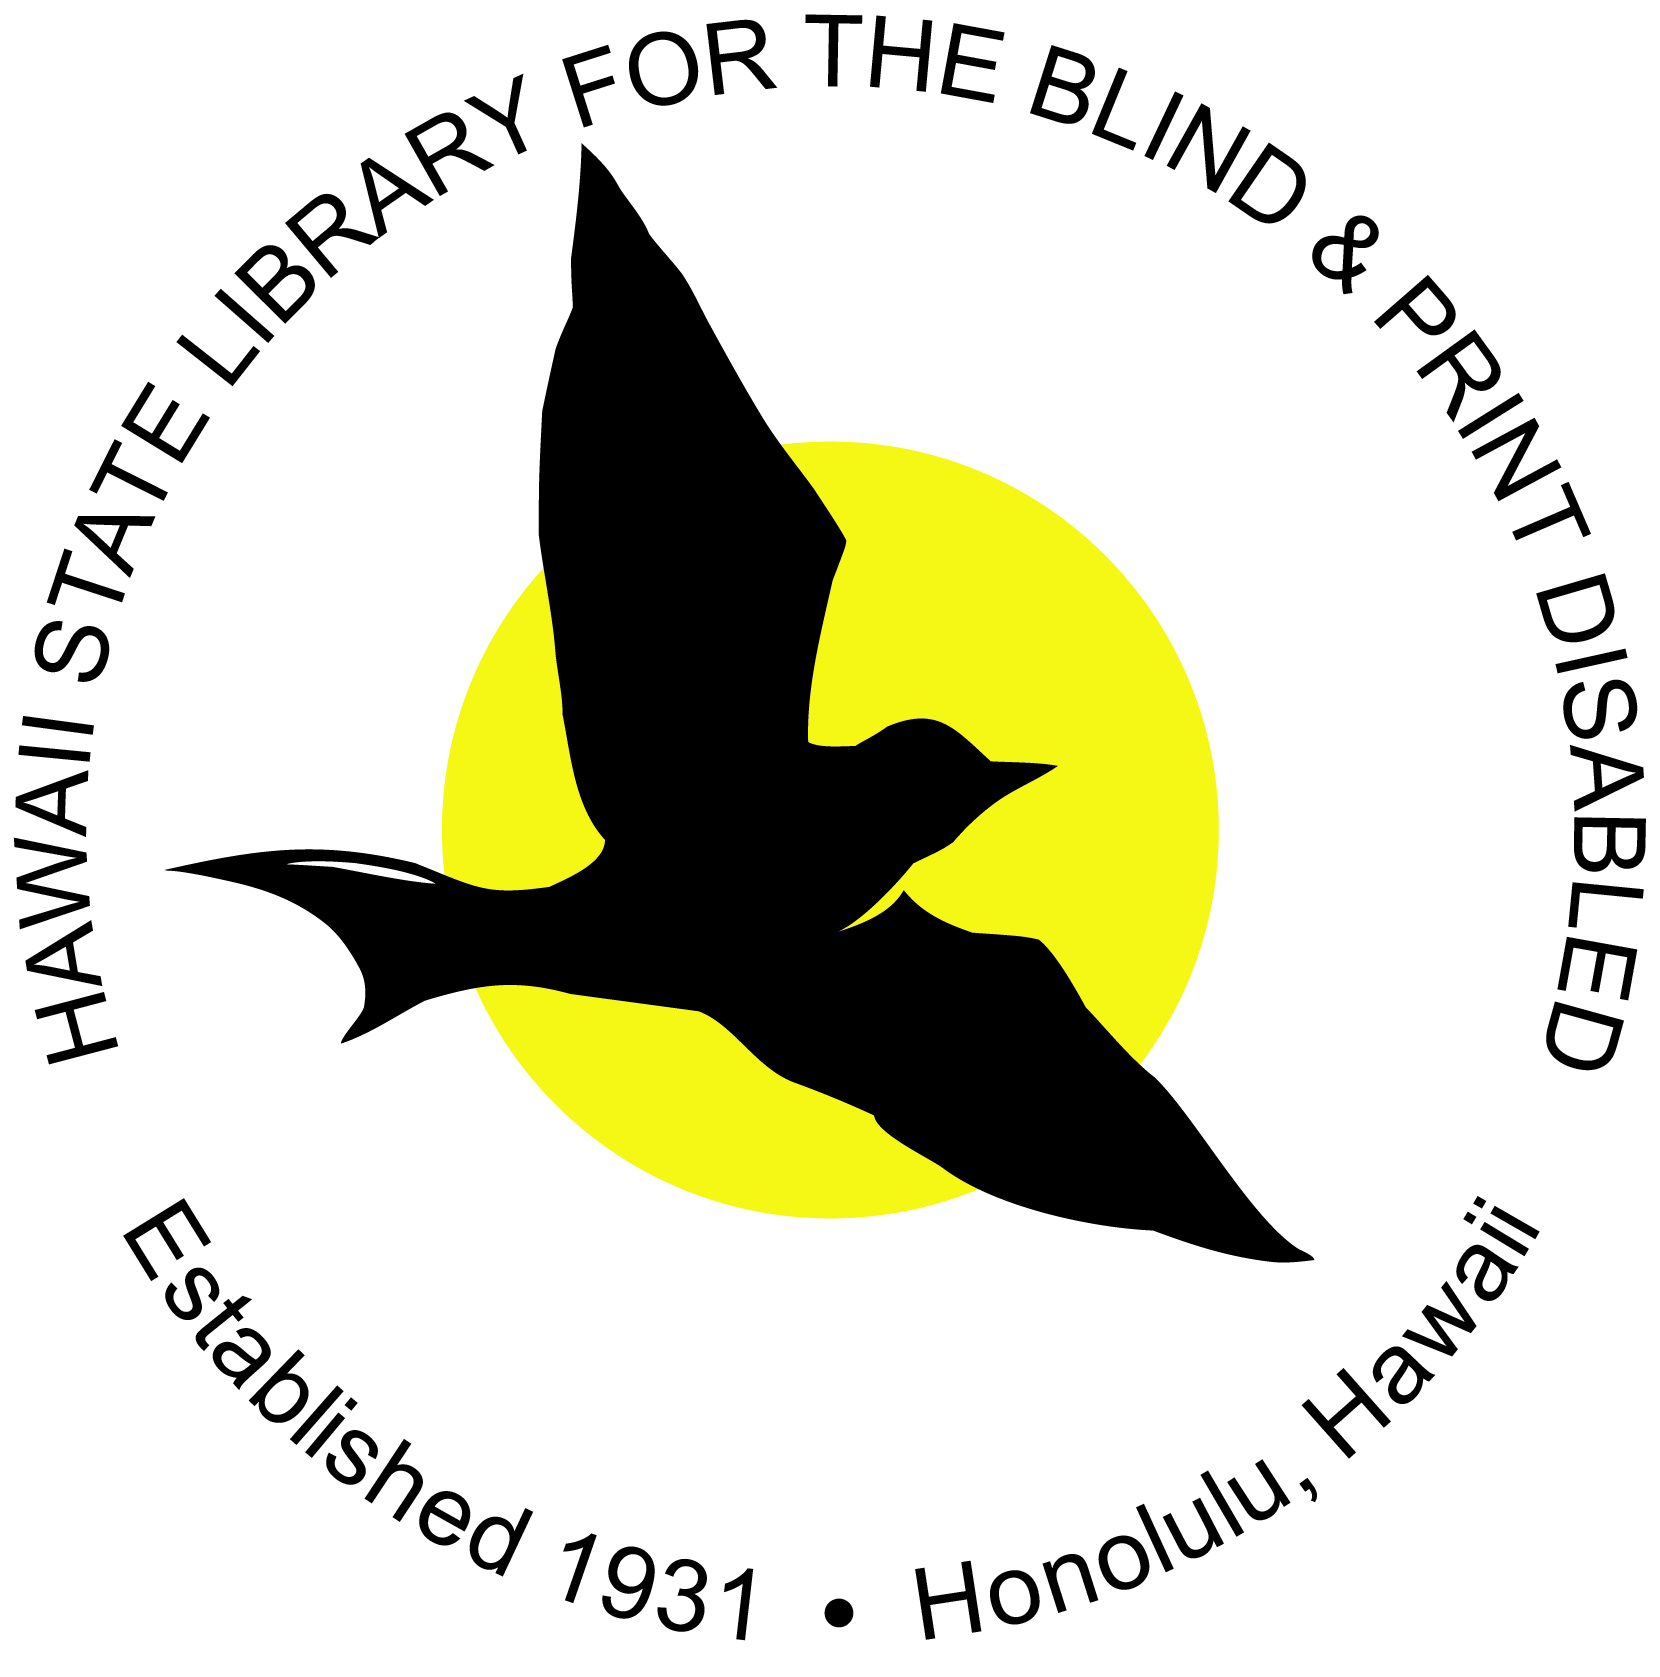 Library for the Blind & Print Disabled logo, with words in a circle surrounding a bird in front of the sun